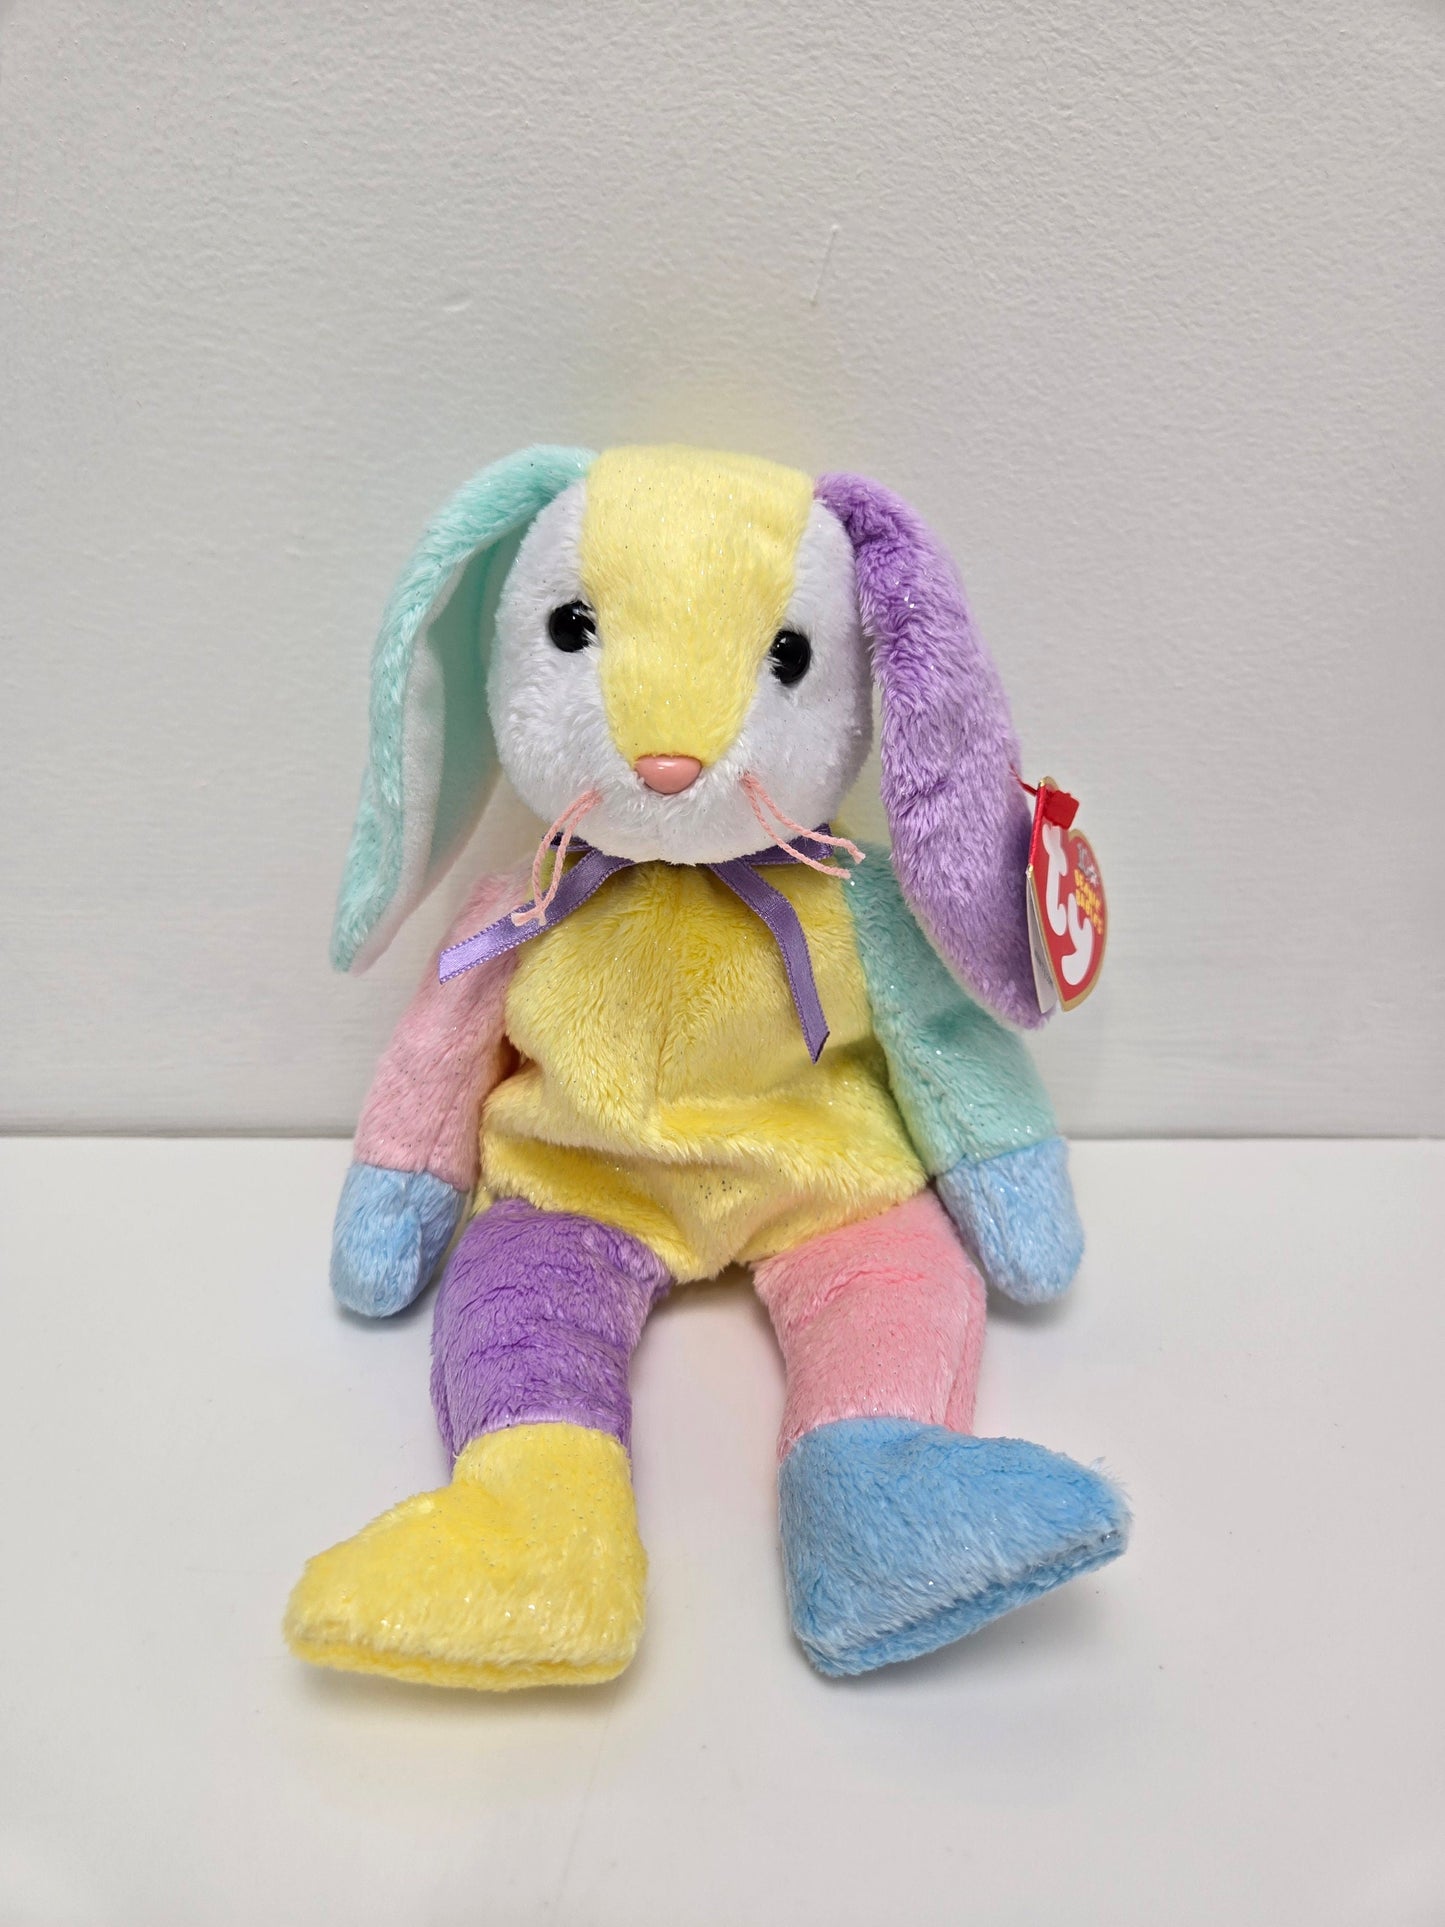 Ty Beanie Baby “Dippy” the Multi-coloured Bunny Rabbit - Yellow Belly (8.5 inch)